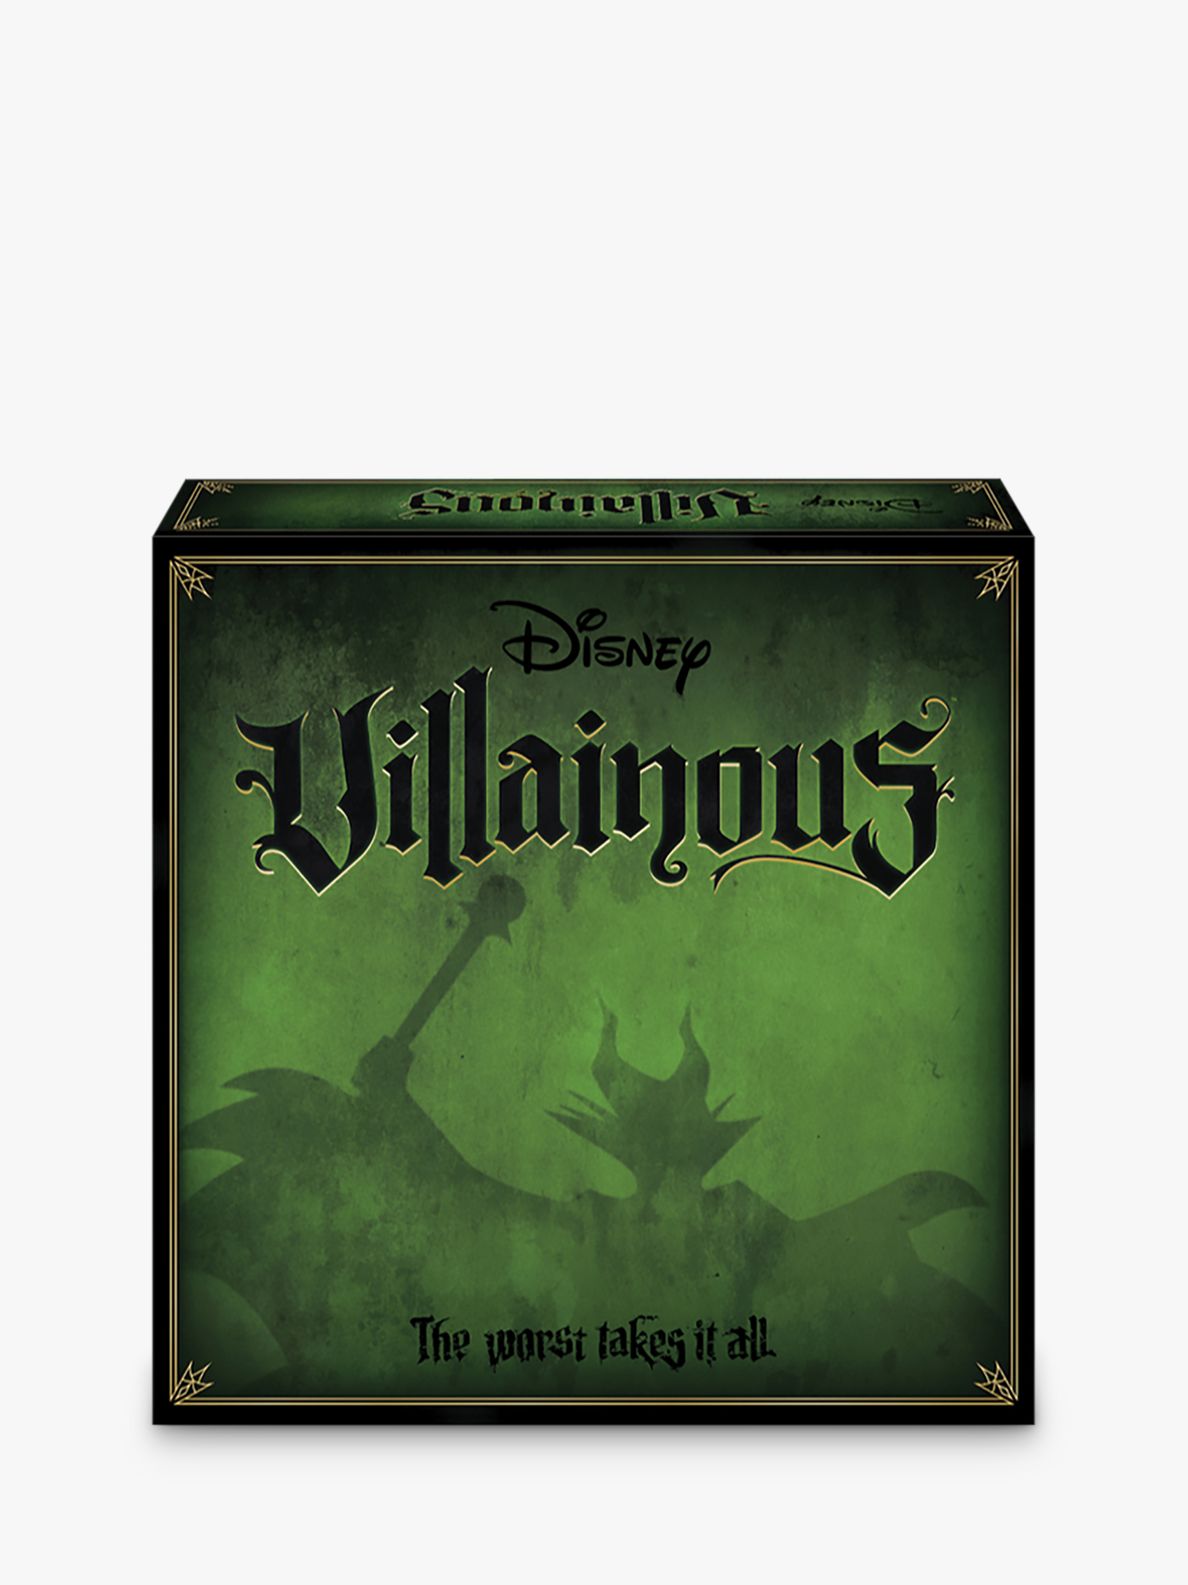 SET 1: 8 Special Movers for Villainous Cards, Complete Set of 8 